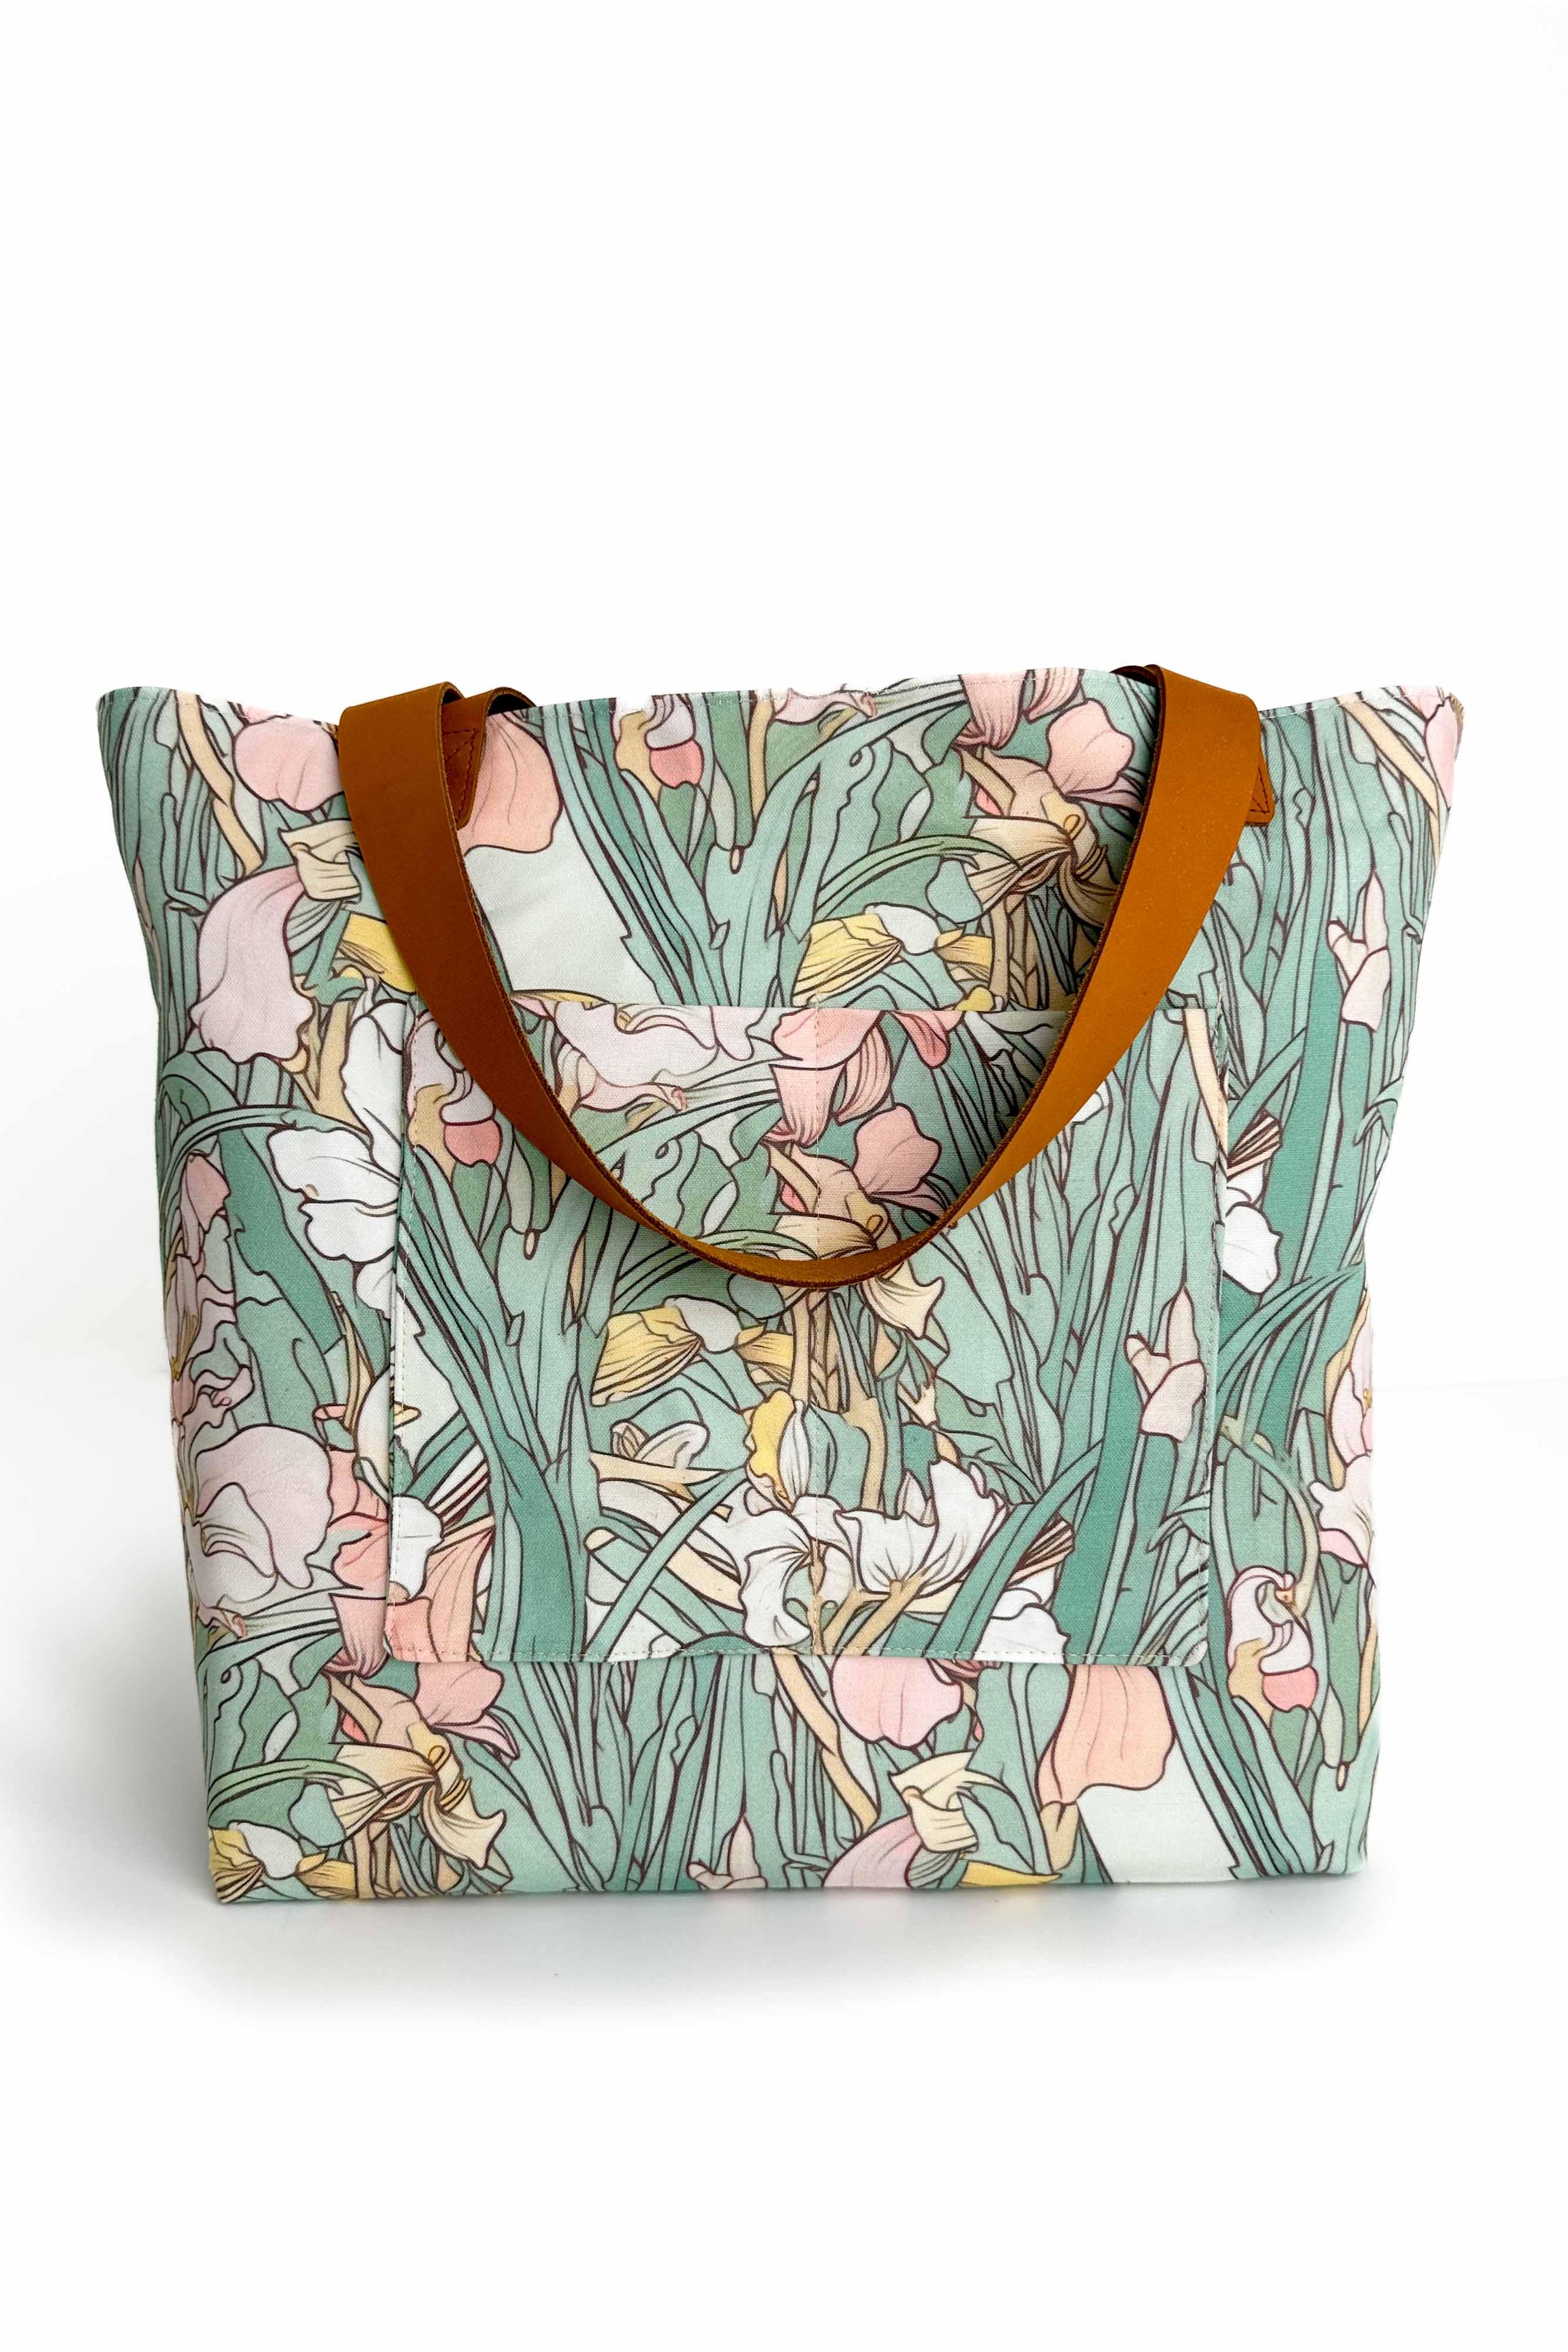 Nouveau Everyday Canvas Tote Bag READY TO SHIP - Modern Makerie